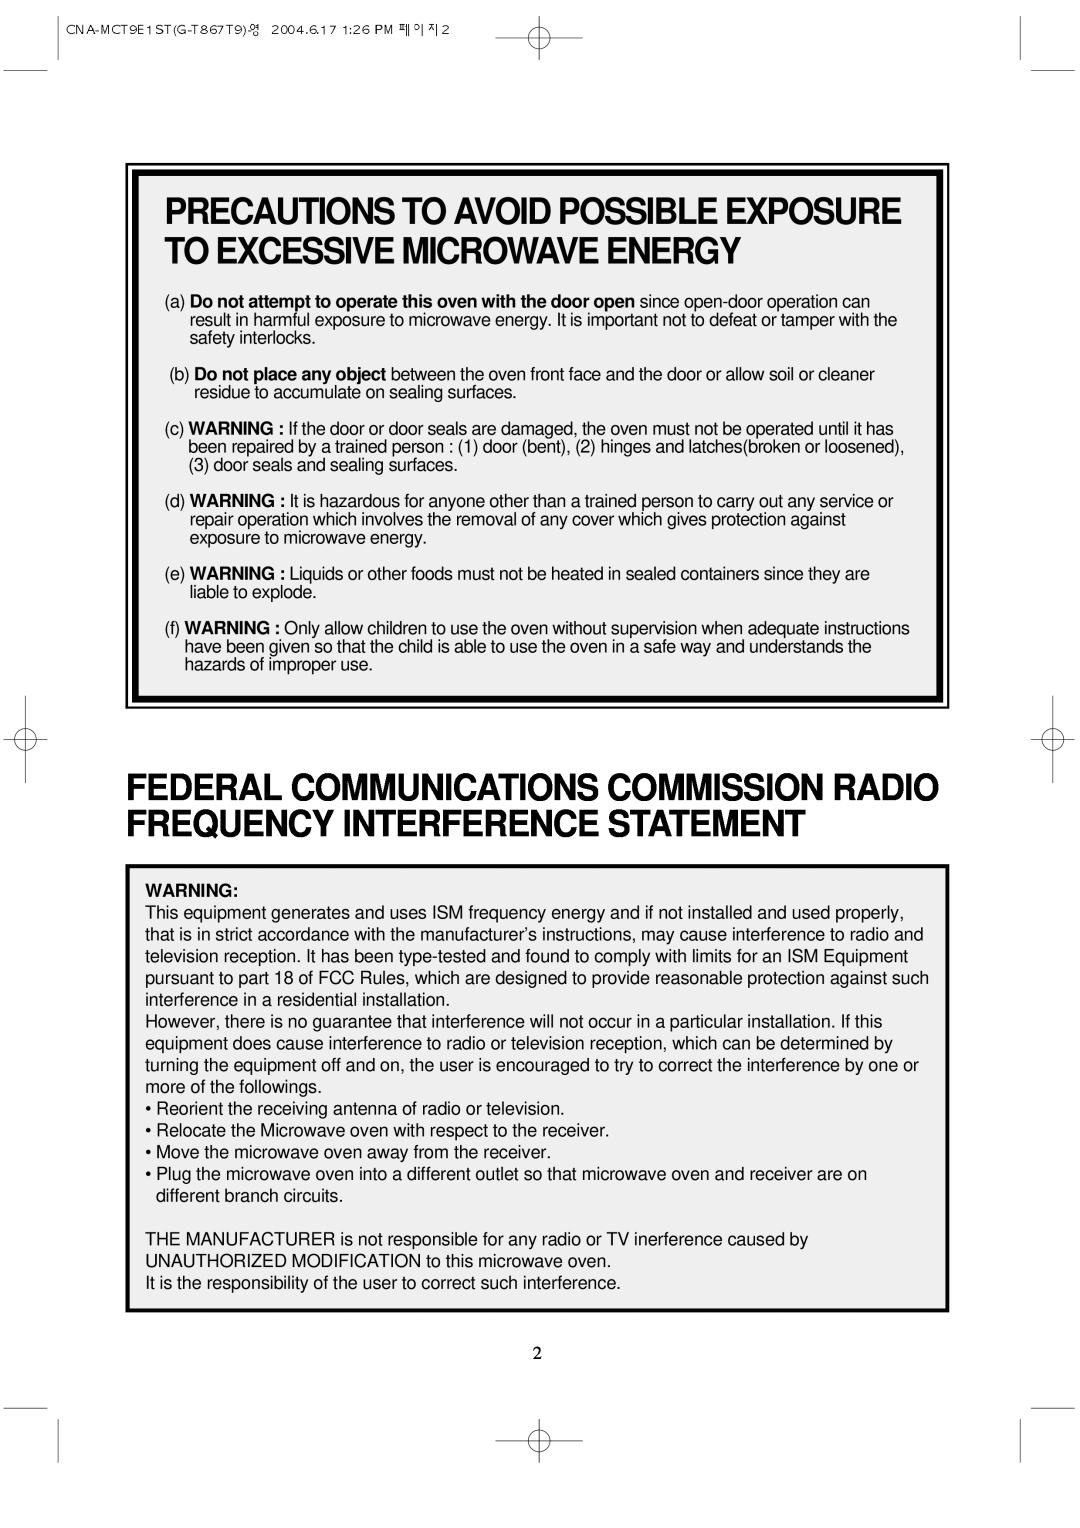 Magic Chef MCT9E1ST manual Precautions To Avoid Possible Exposure To Excessive Microwave Energy 